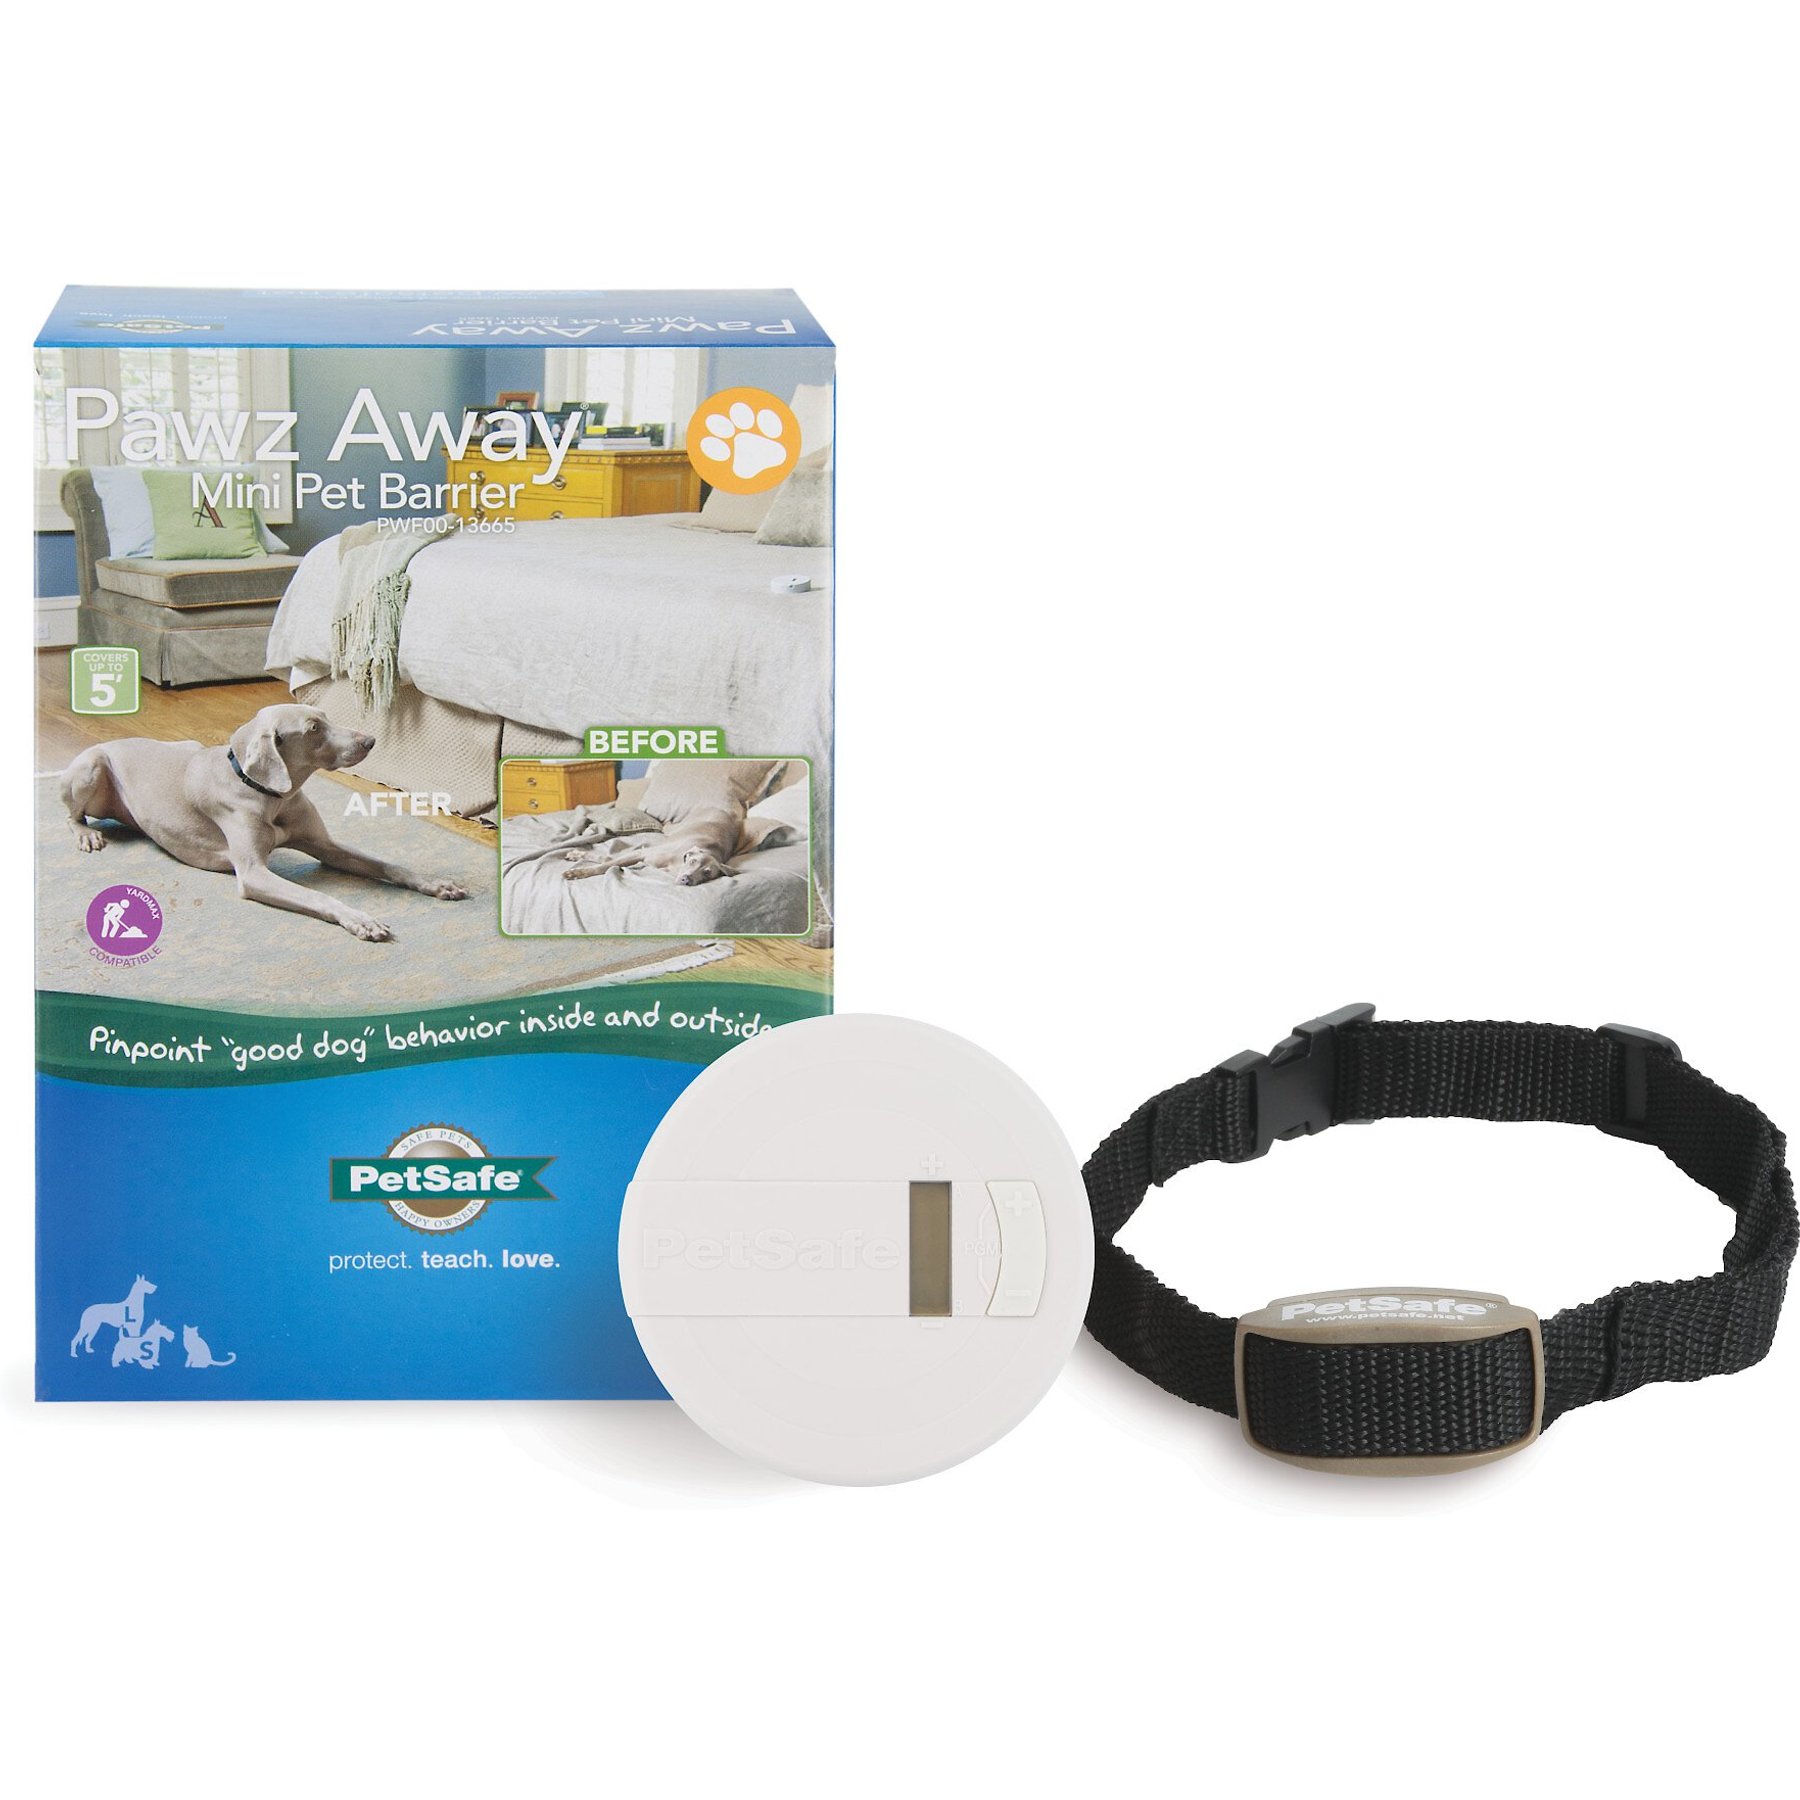 PetSafe Pawz Away Mini Pet Barrier for Cats and Dogs - Adjustable Range up  to 2 1/2 Feet Radius - Pet Proof Your Home - Waterproof - For Use Indoors